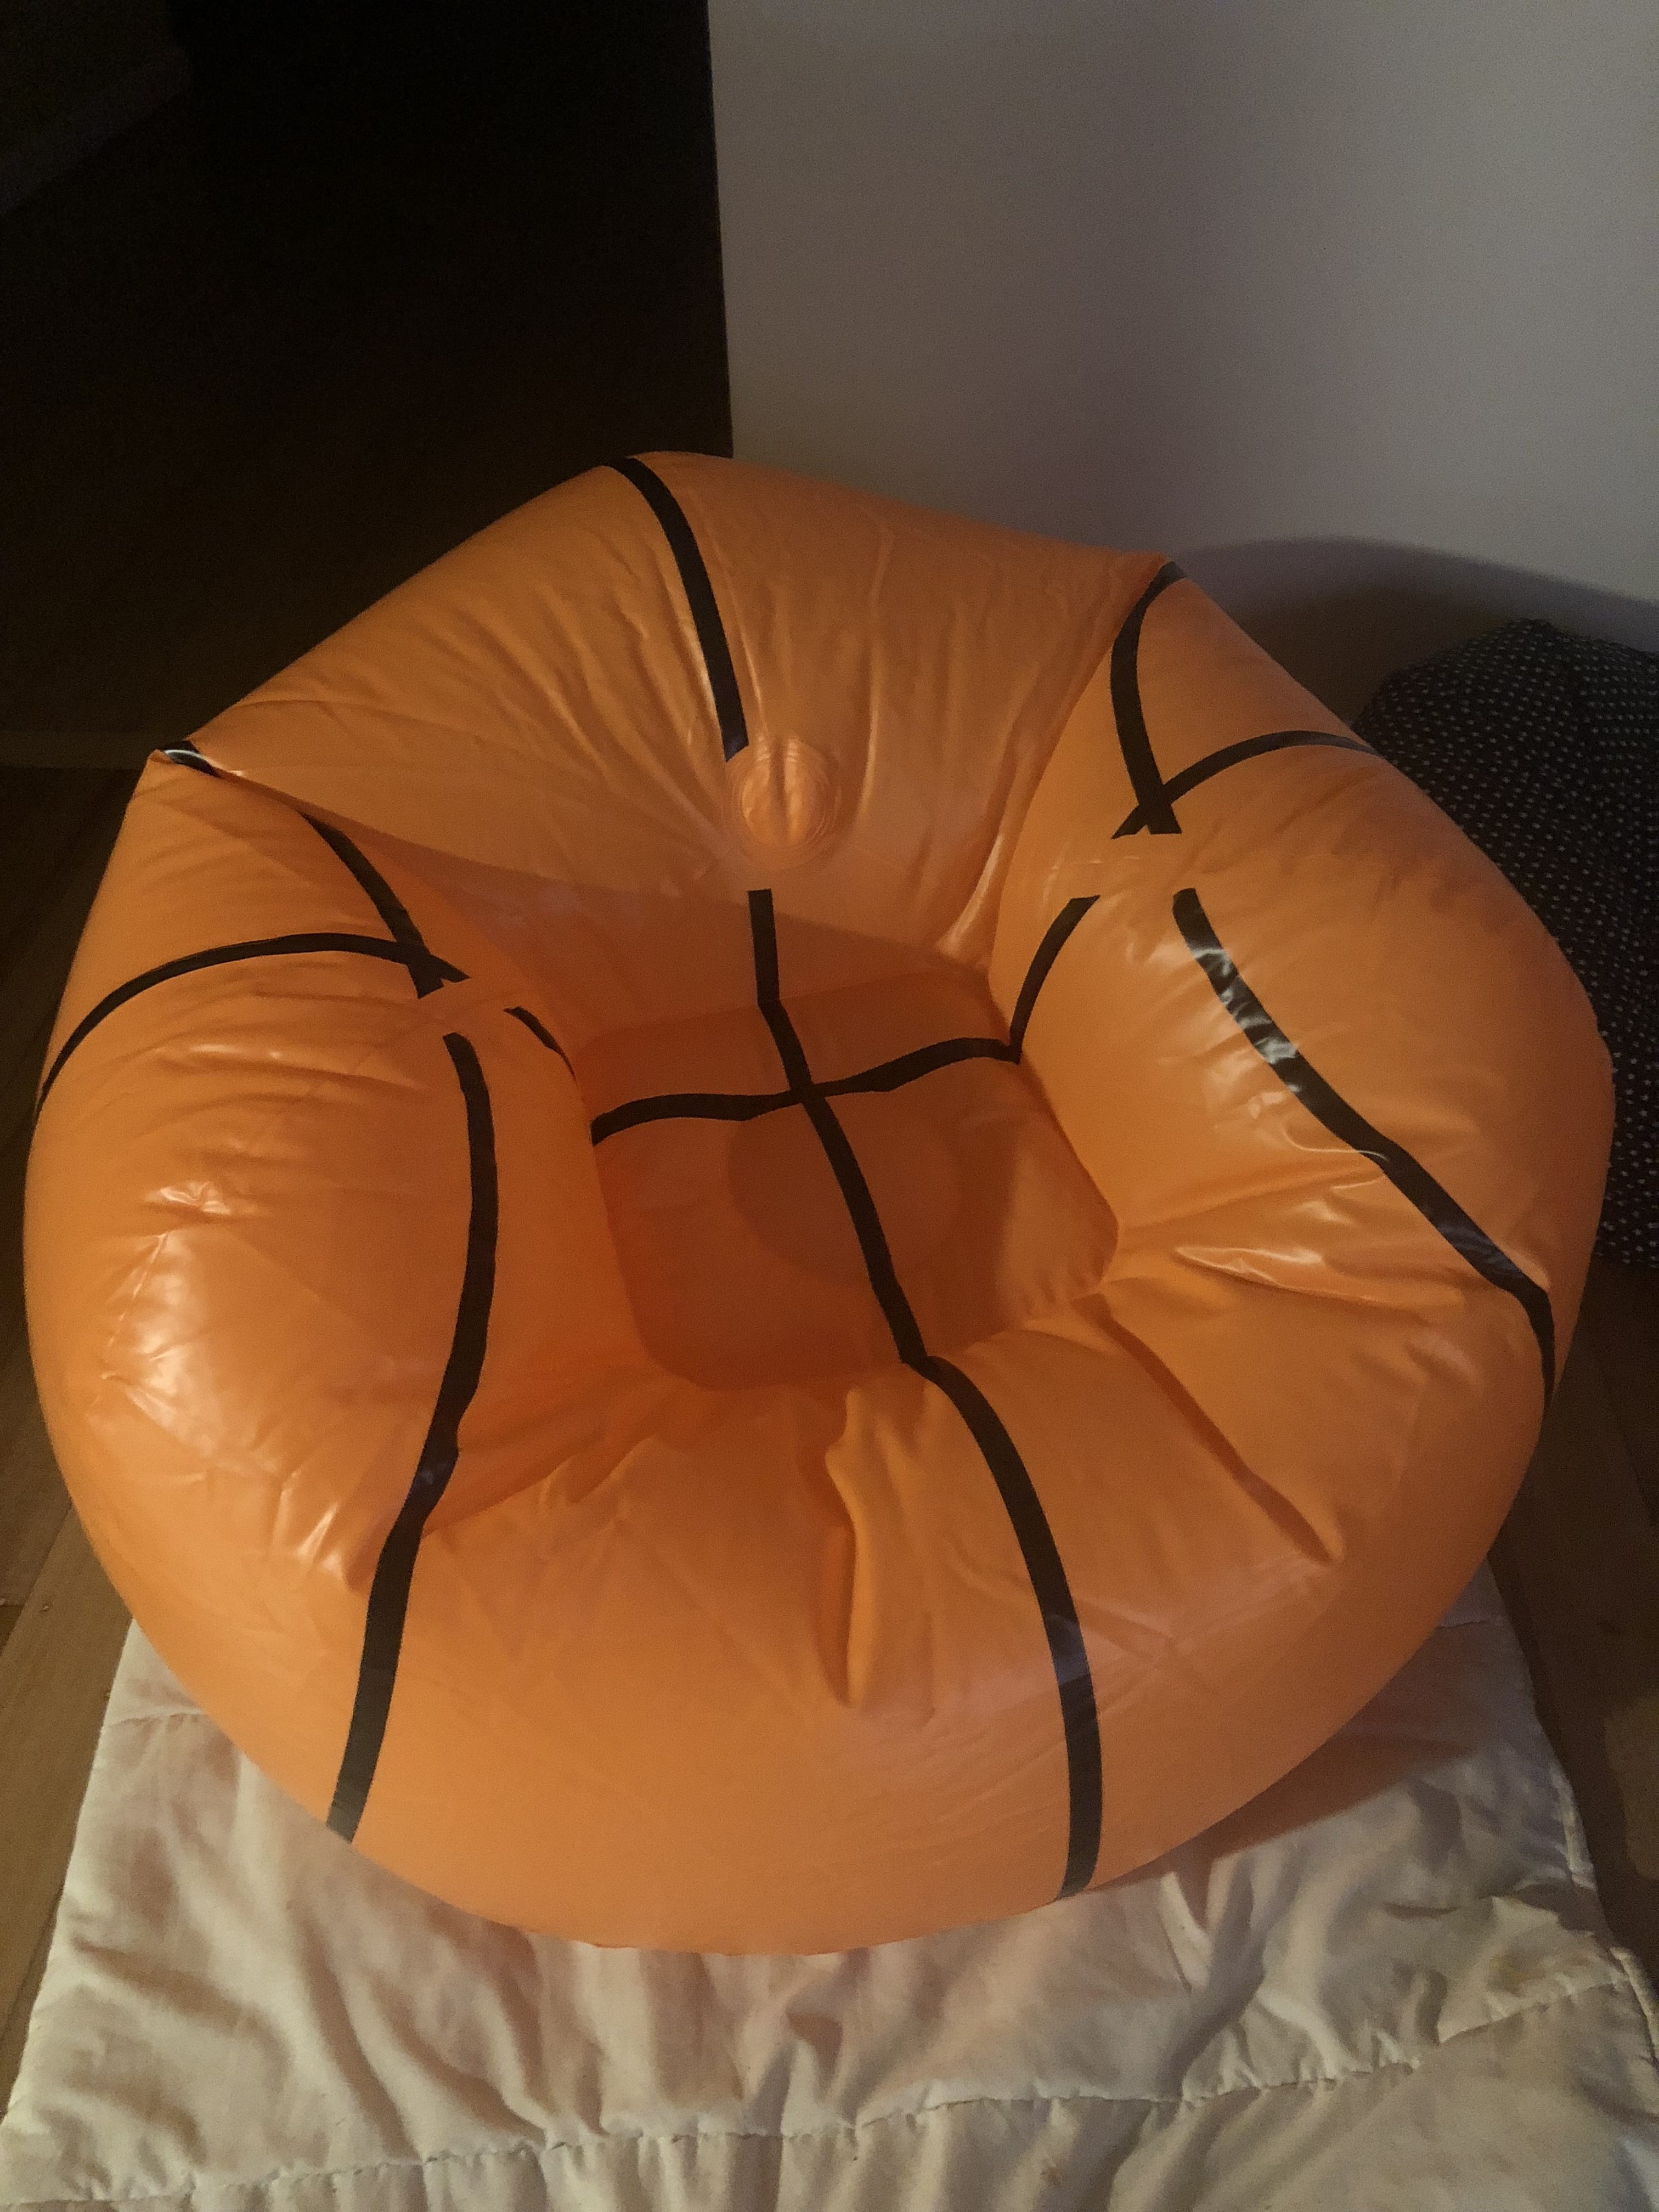 NaNoWriMo Day 2 in the inflatable basketball chair